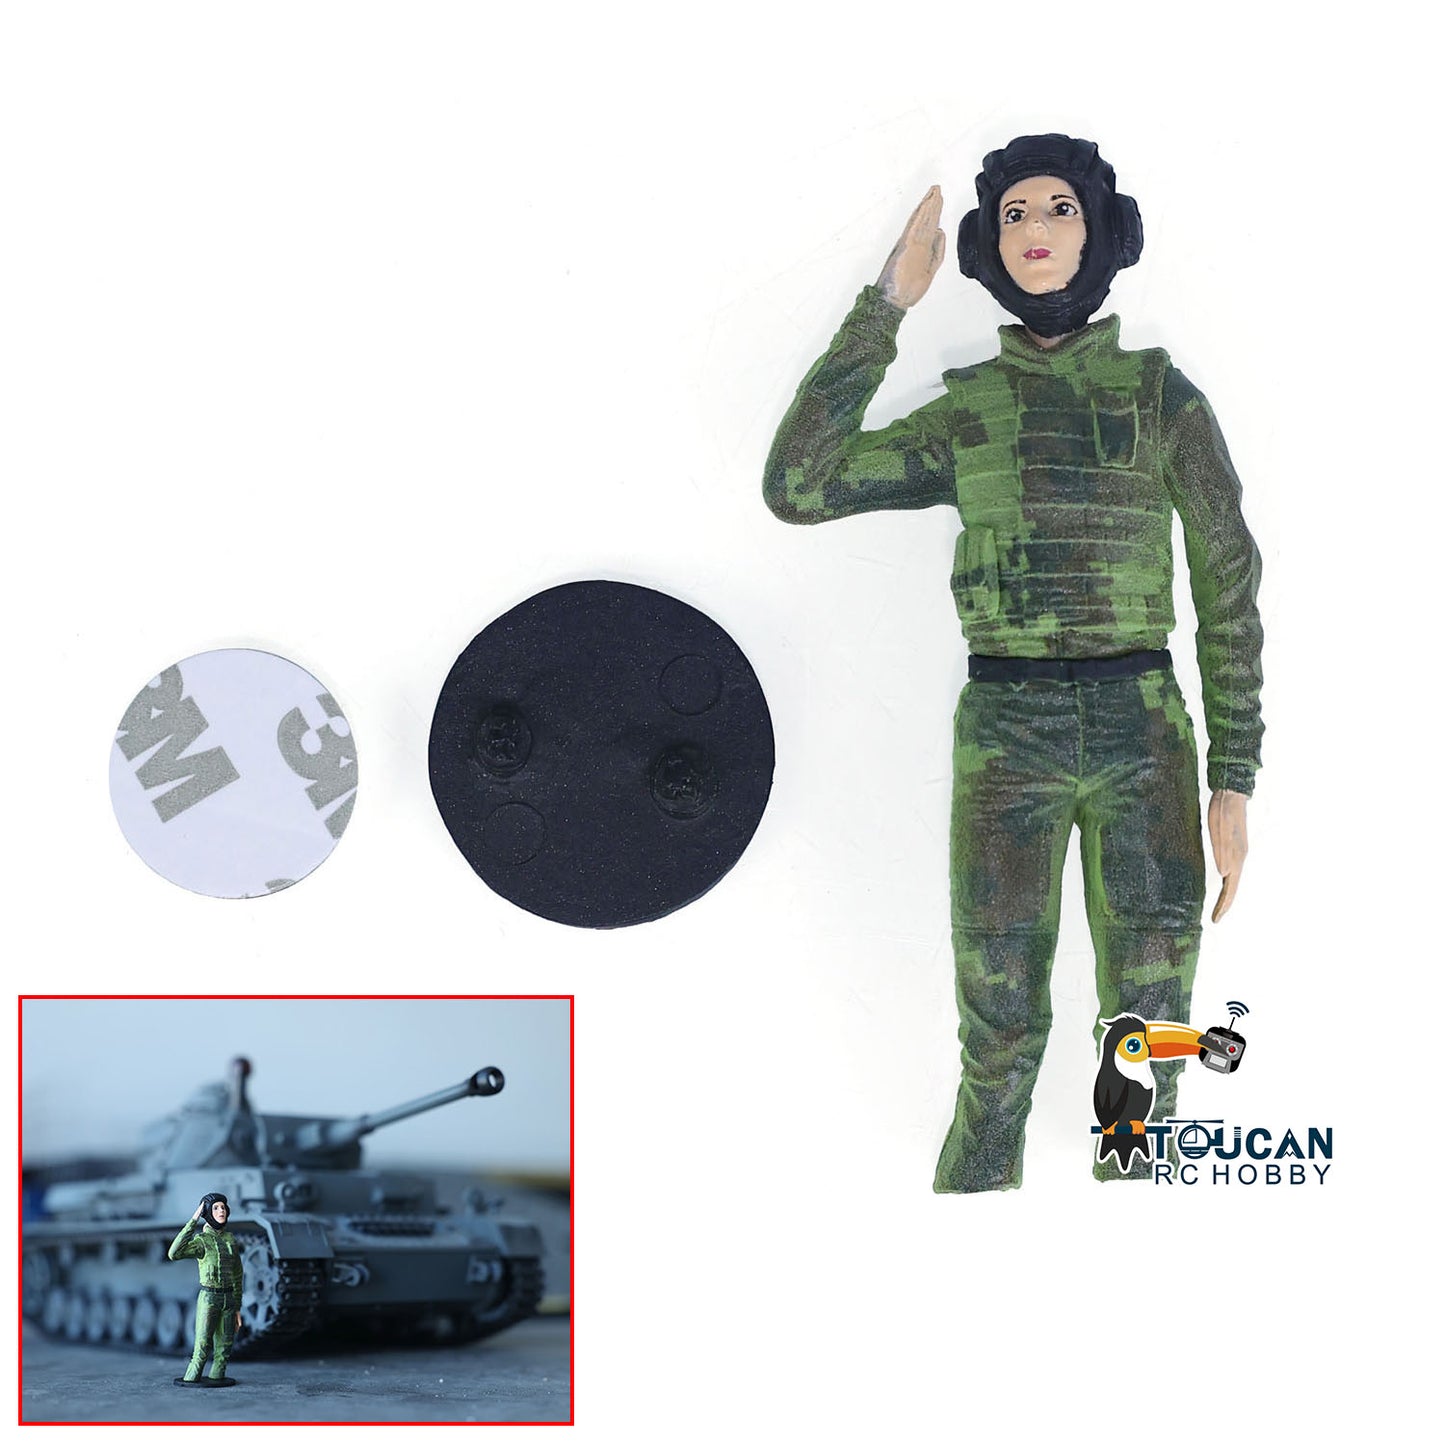 Russian Resin Female Soldier Figure Decoration Decoration Parts for DIY Heng Long 1/16 Scale RC Radio Control Tanks Model